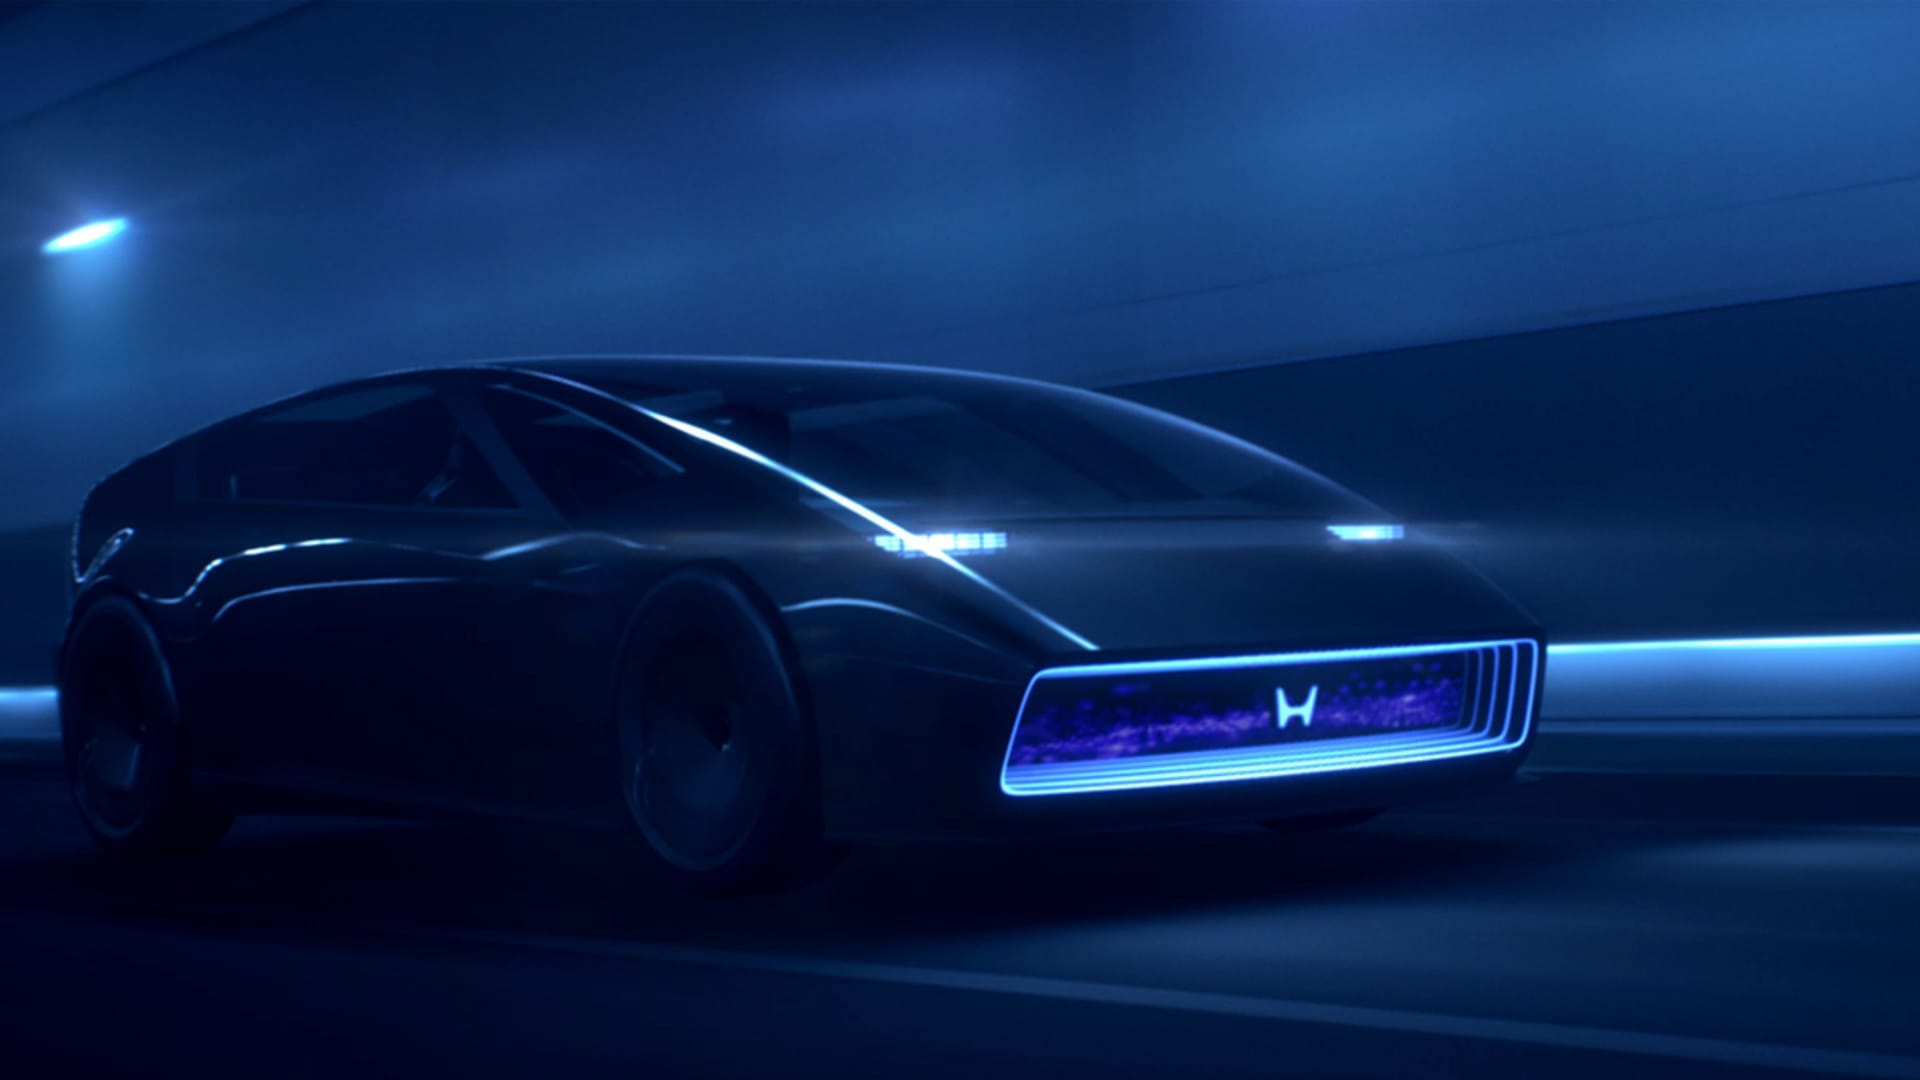 Honda teases unique EVs with futuristic ‘House-Hub’ and ‘Saloon’ concept cars